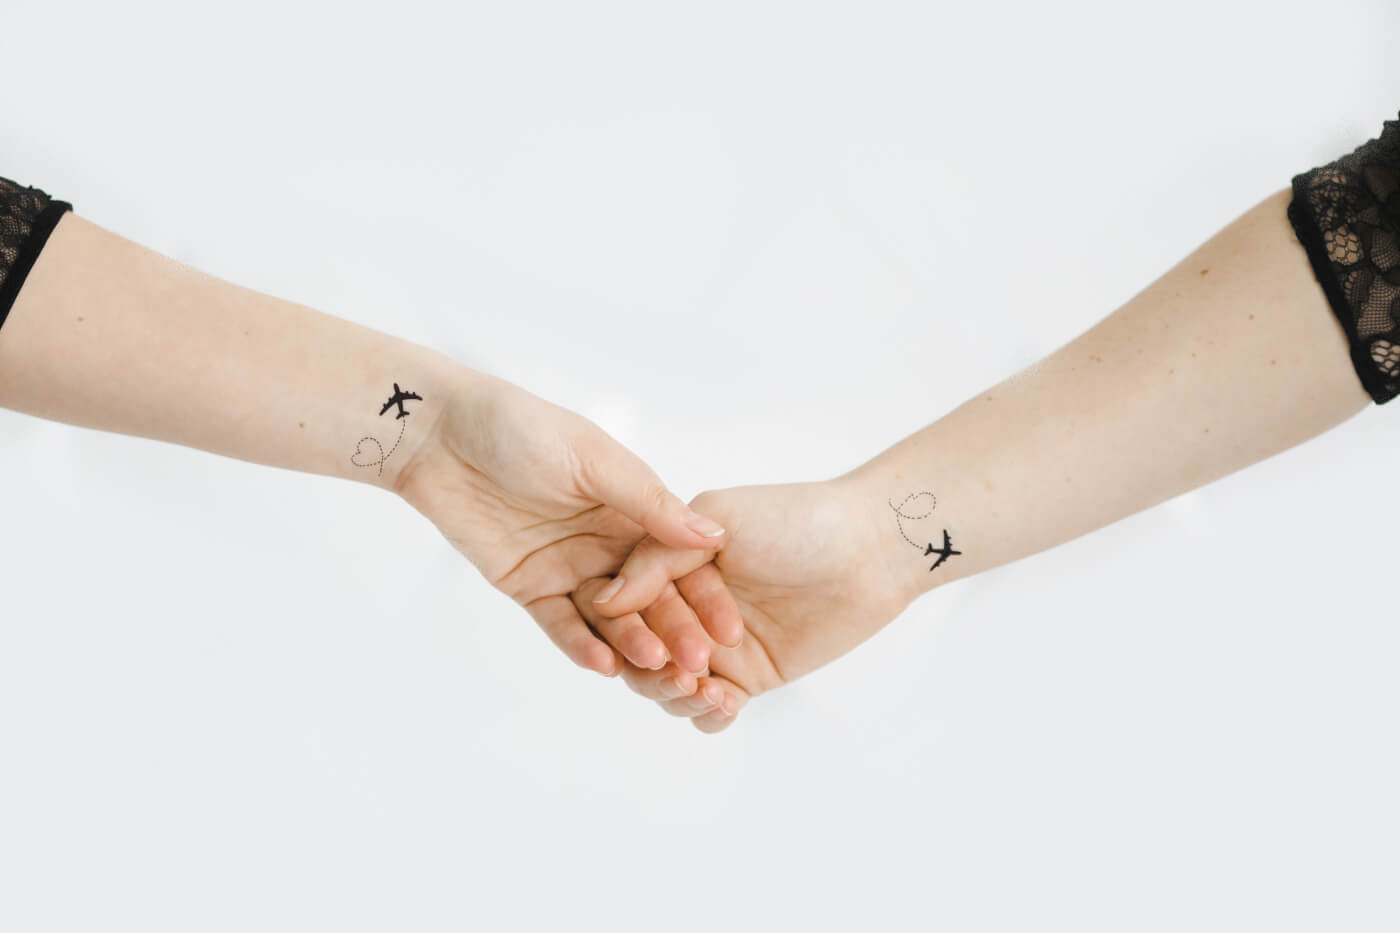 small tattoo designs for hands